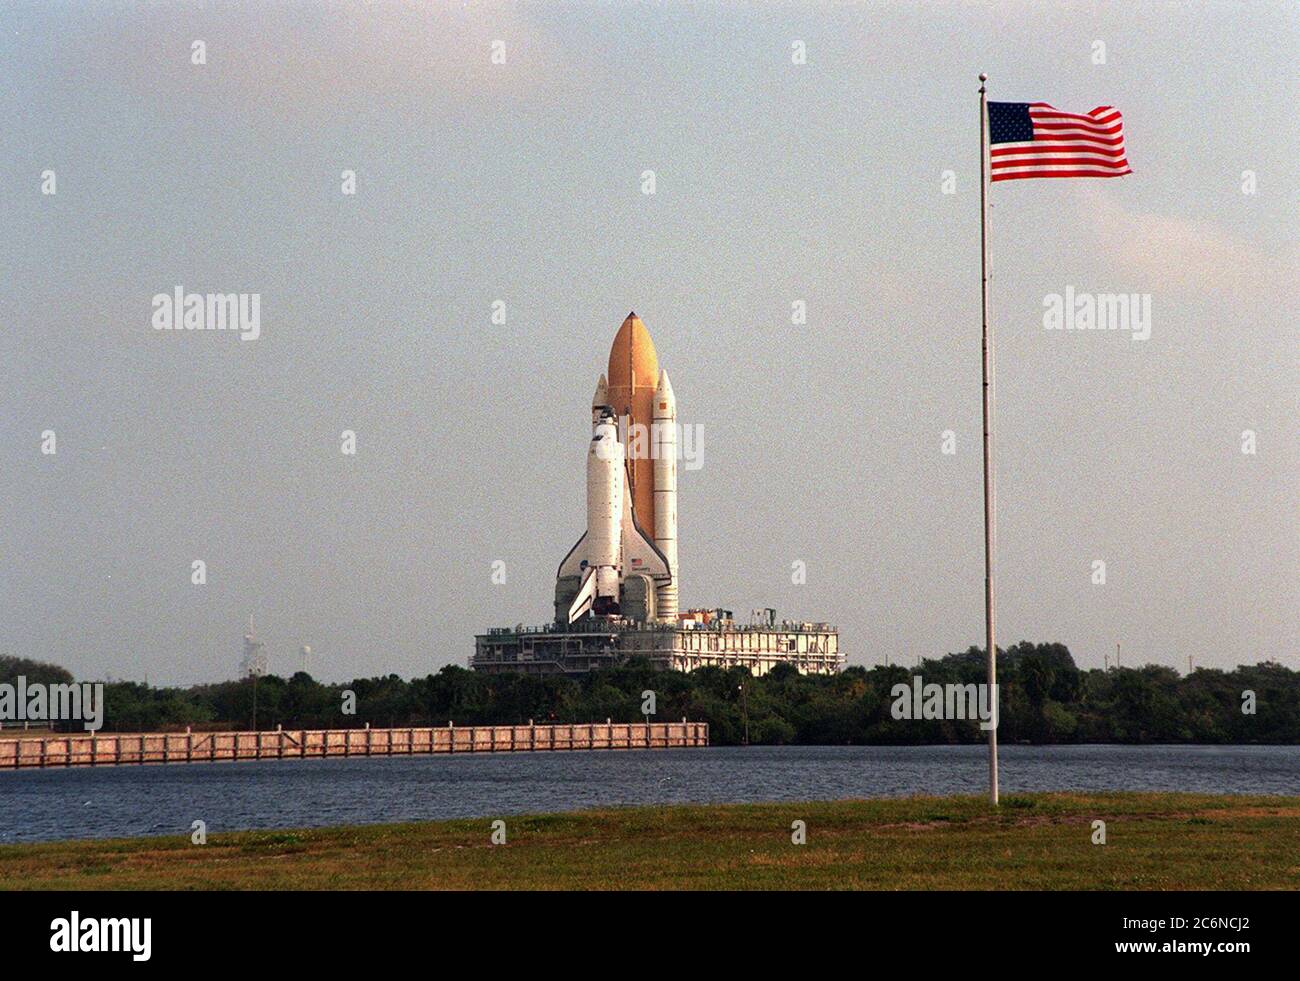 With the American flag flapping in the morning breeze, Space Shuttle Discovery, across the turn basin, makes its crawl to Launch Pad 39B (background, left) atop the mobile launcher platform and crawler transporter. Once at the pad, the orbiter, external tank and solid rocket boosters will undergo final preparations for the STS-103 launch targeted for Dec. 6, 1999, at 2:37 a.m. EST. Stock Photo